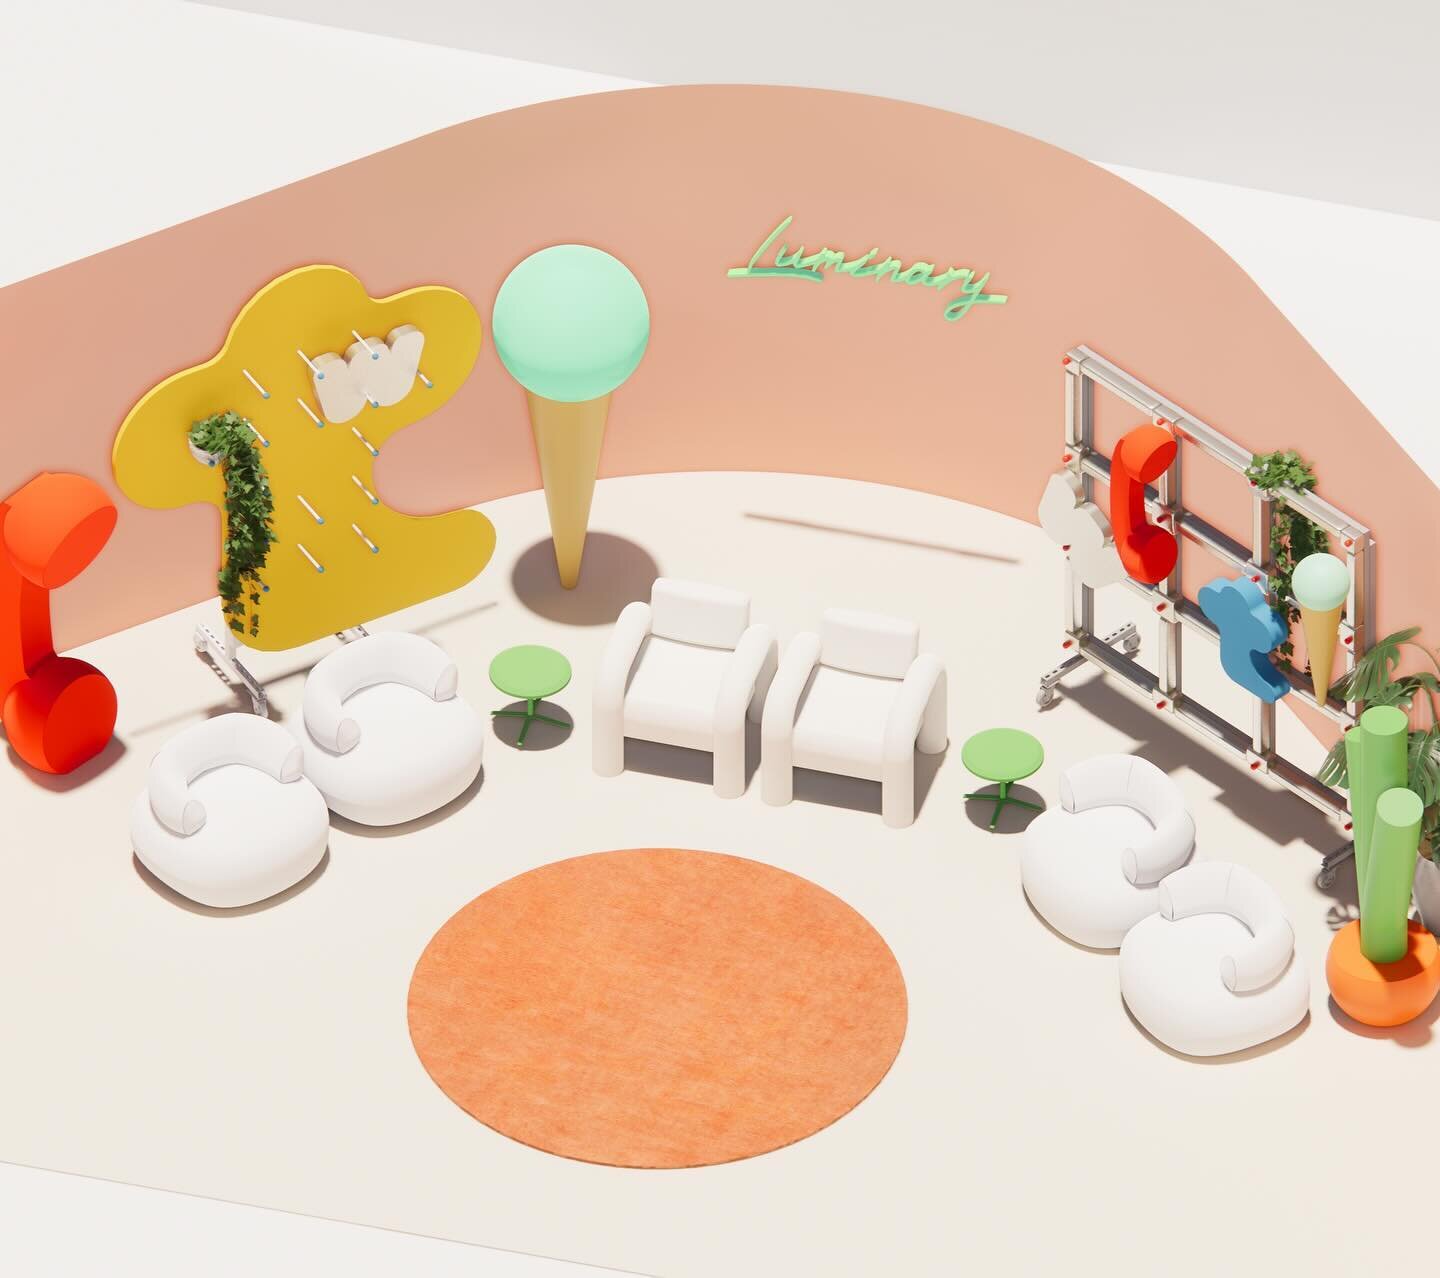 Recently completed interactive and colourful talk show set design-build project for our interesting and cool clients. This is not the final design we installed but we love this concept which uses large and small plushie objects for guests and hosts t